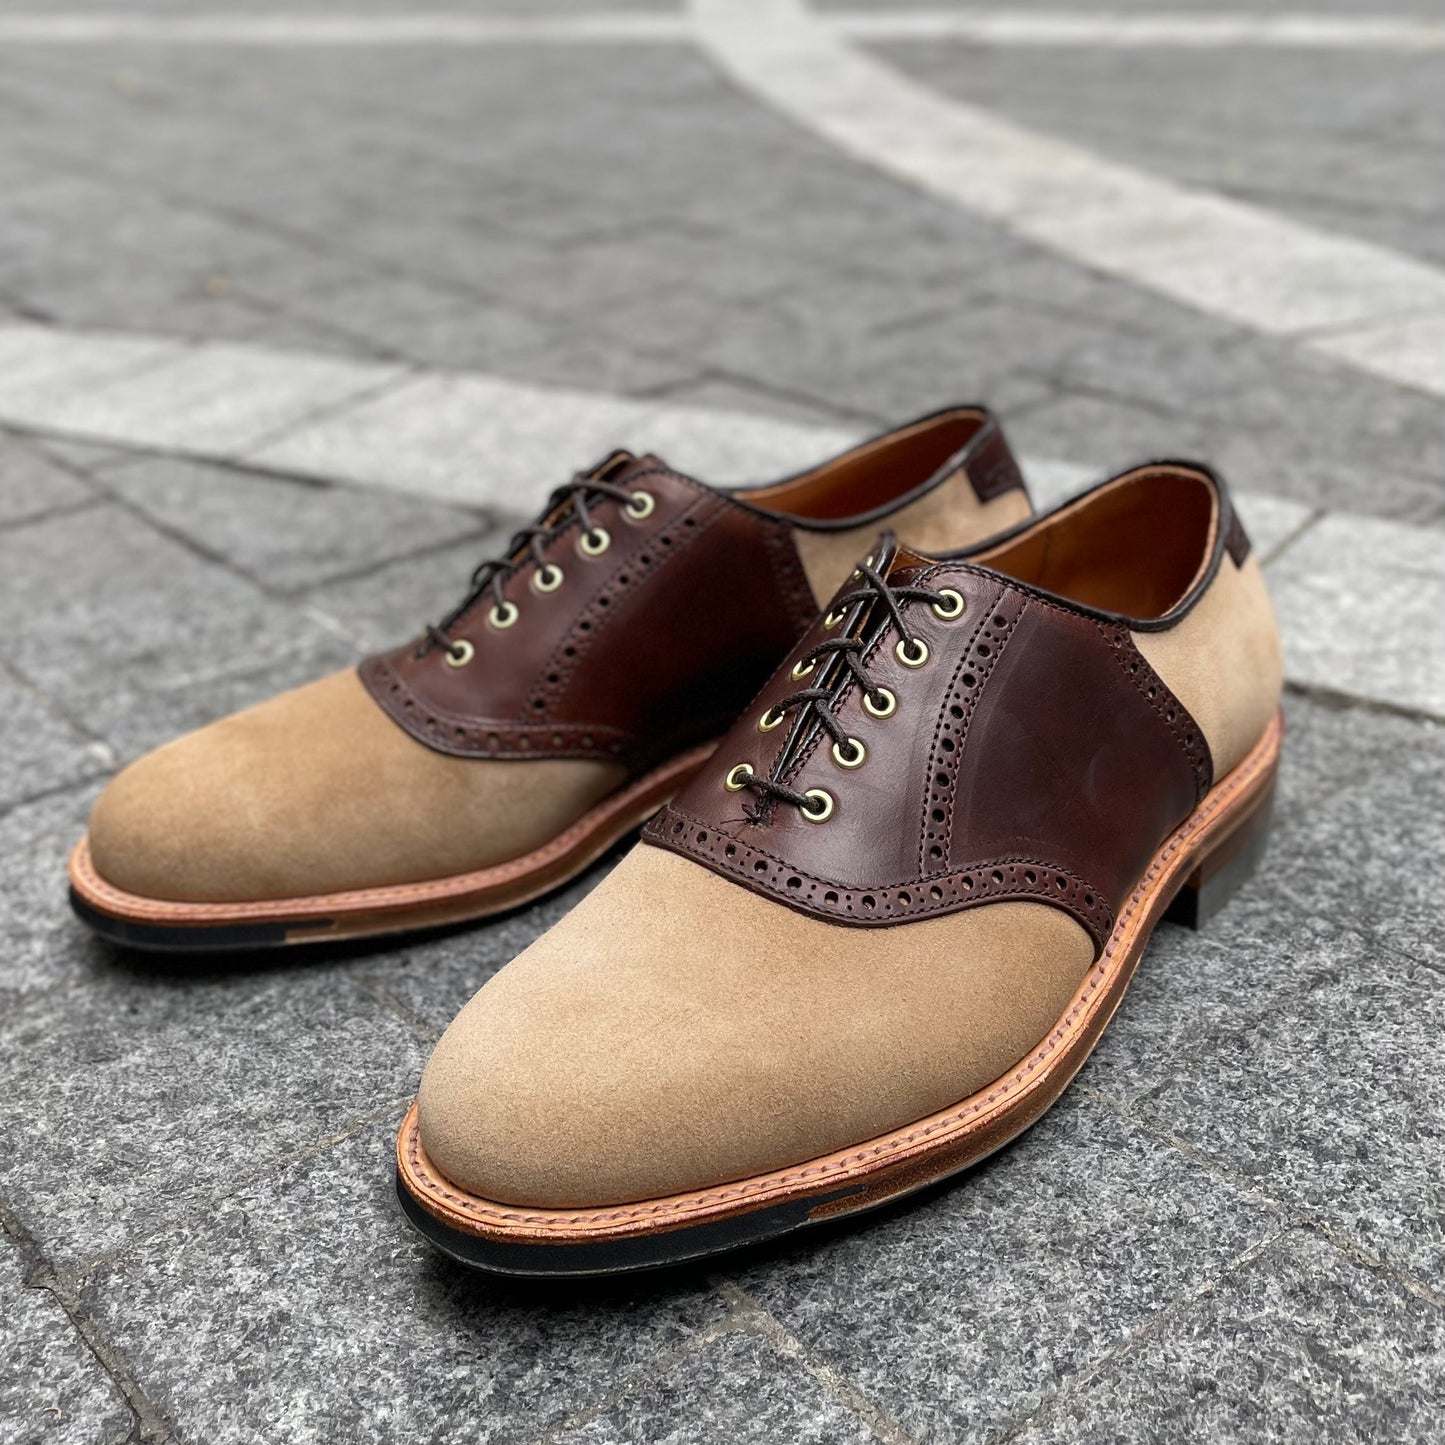 D1304C - Valhalla Saddle Oxford in CXL and Tan Suede